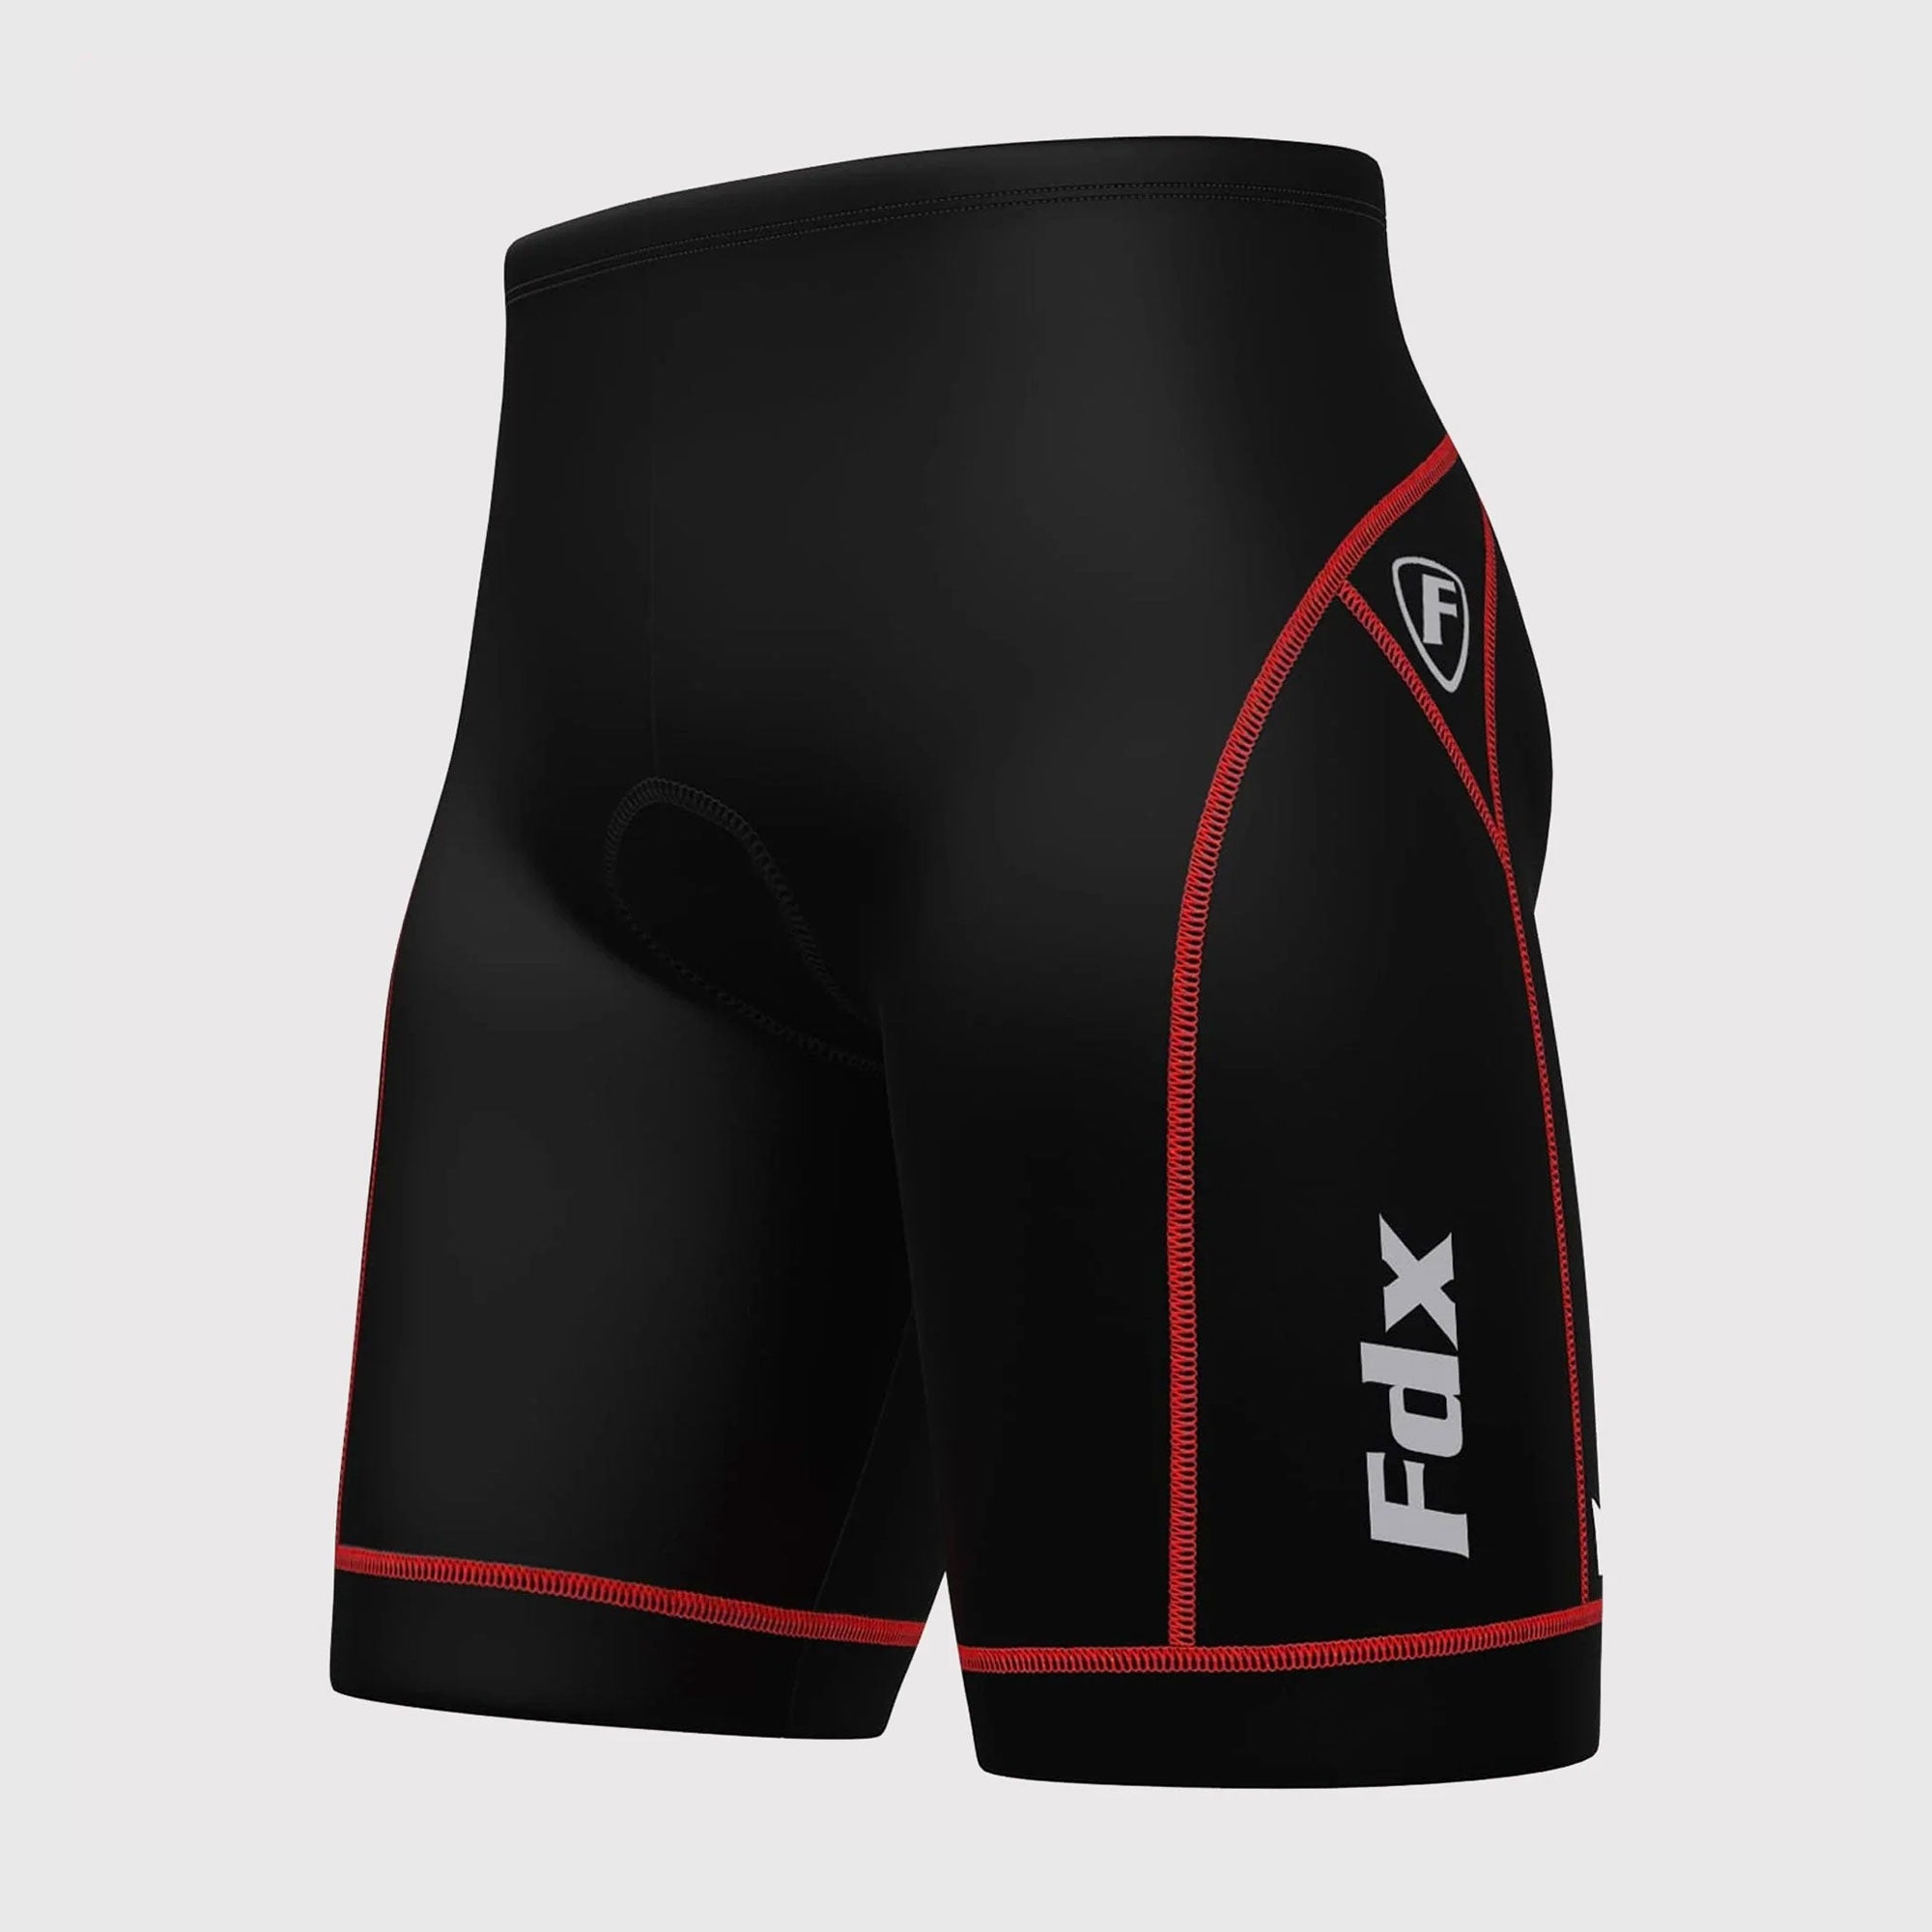 Fdx Mens Black & Red Gel Padded Cycling Shorts for Summer Best Outdoor Knickers Road Bike Short Length Pants - Ridest